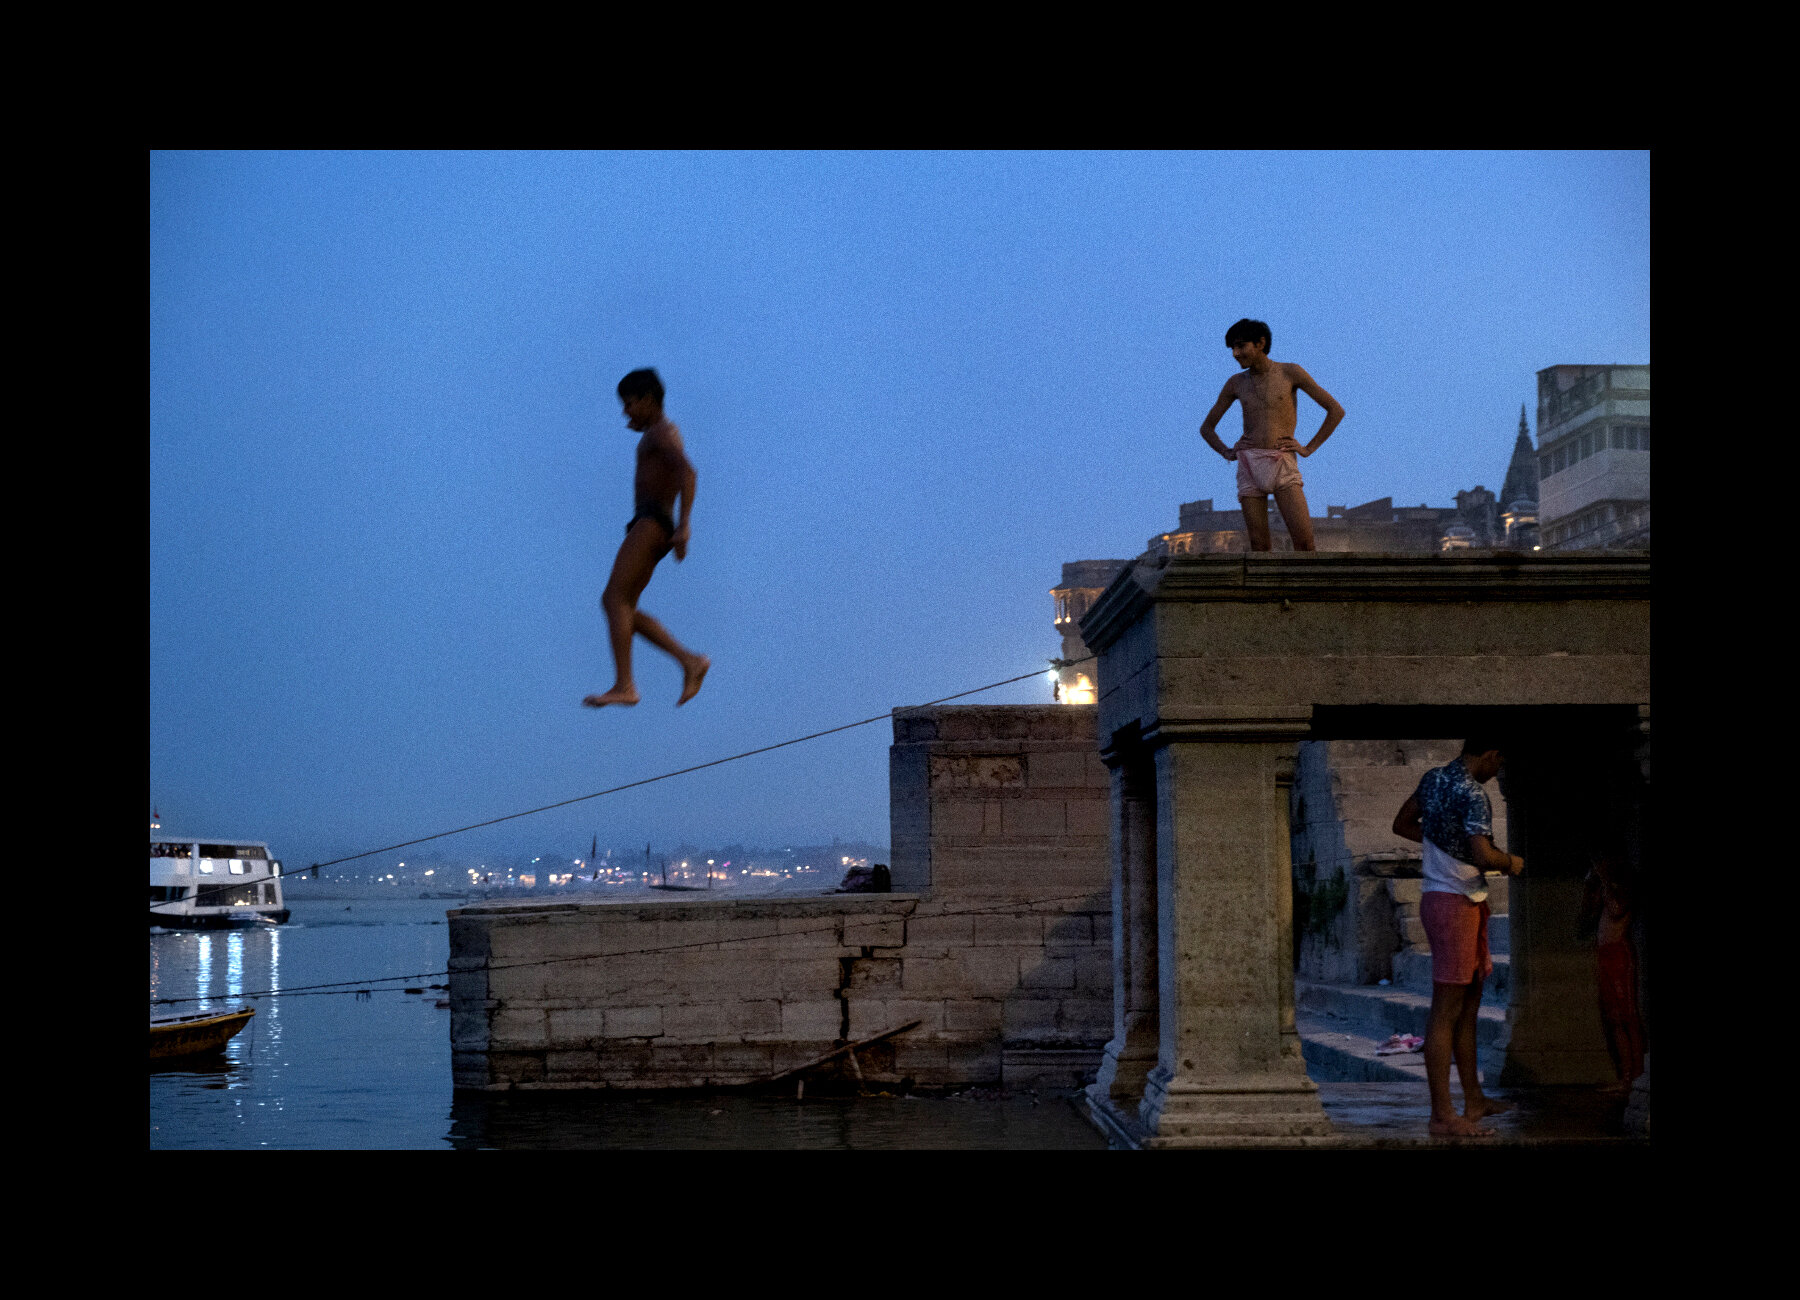 Kids jump off a ghat into the Ganges River in Varanasi, India. 2019